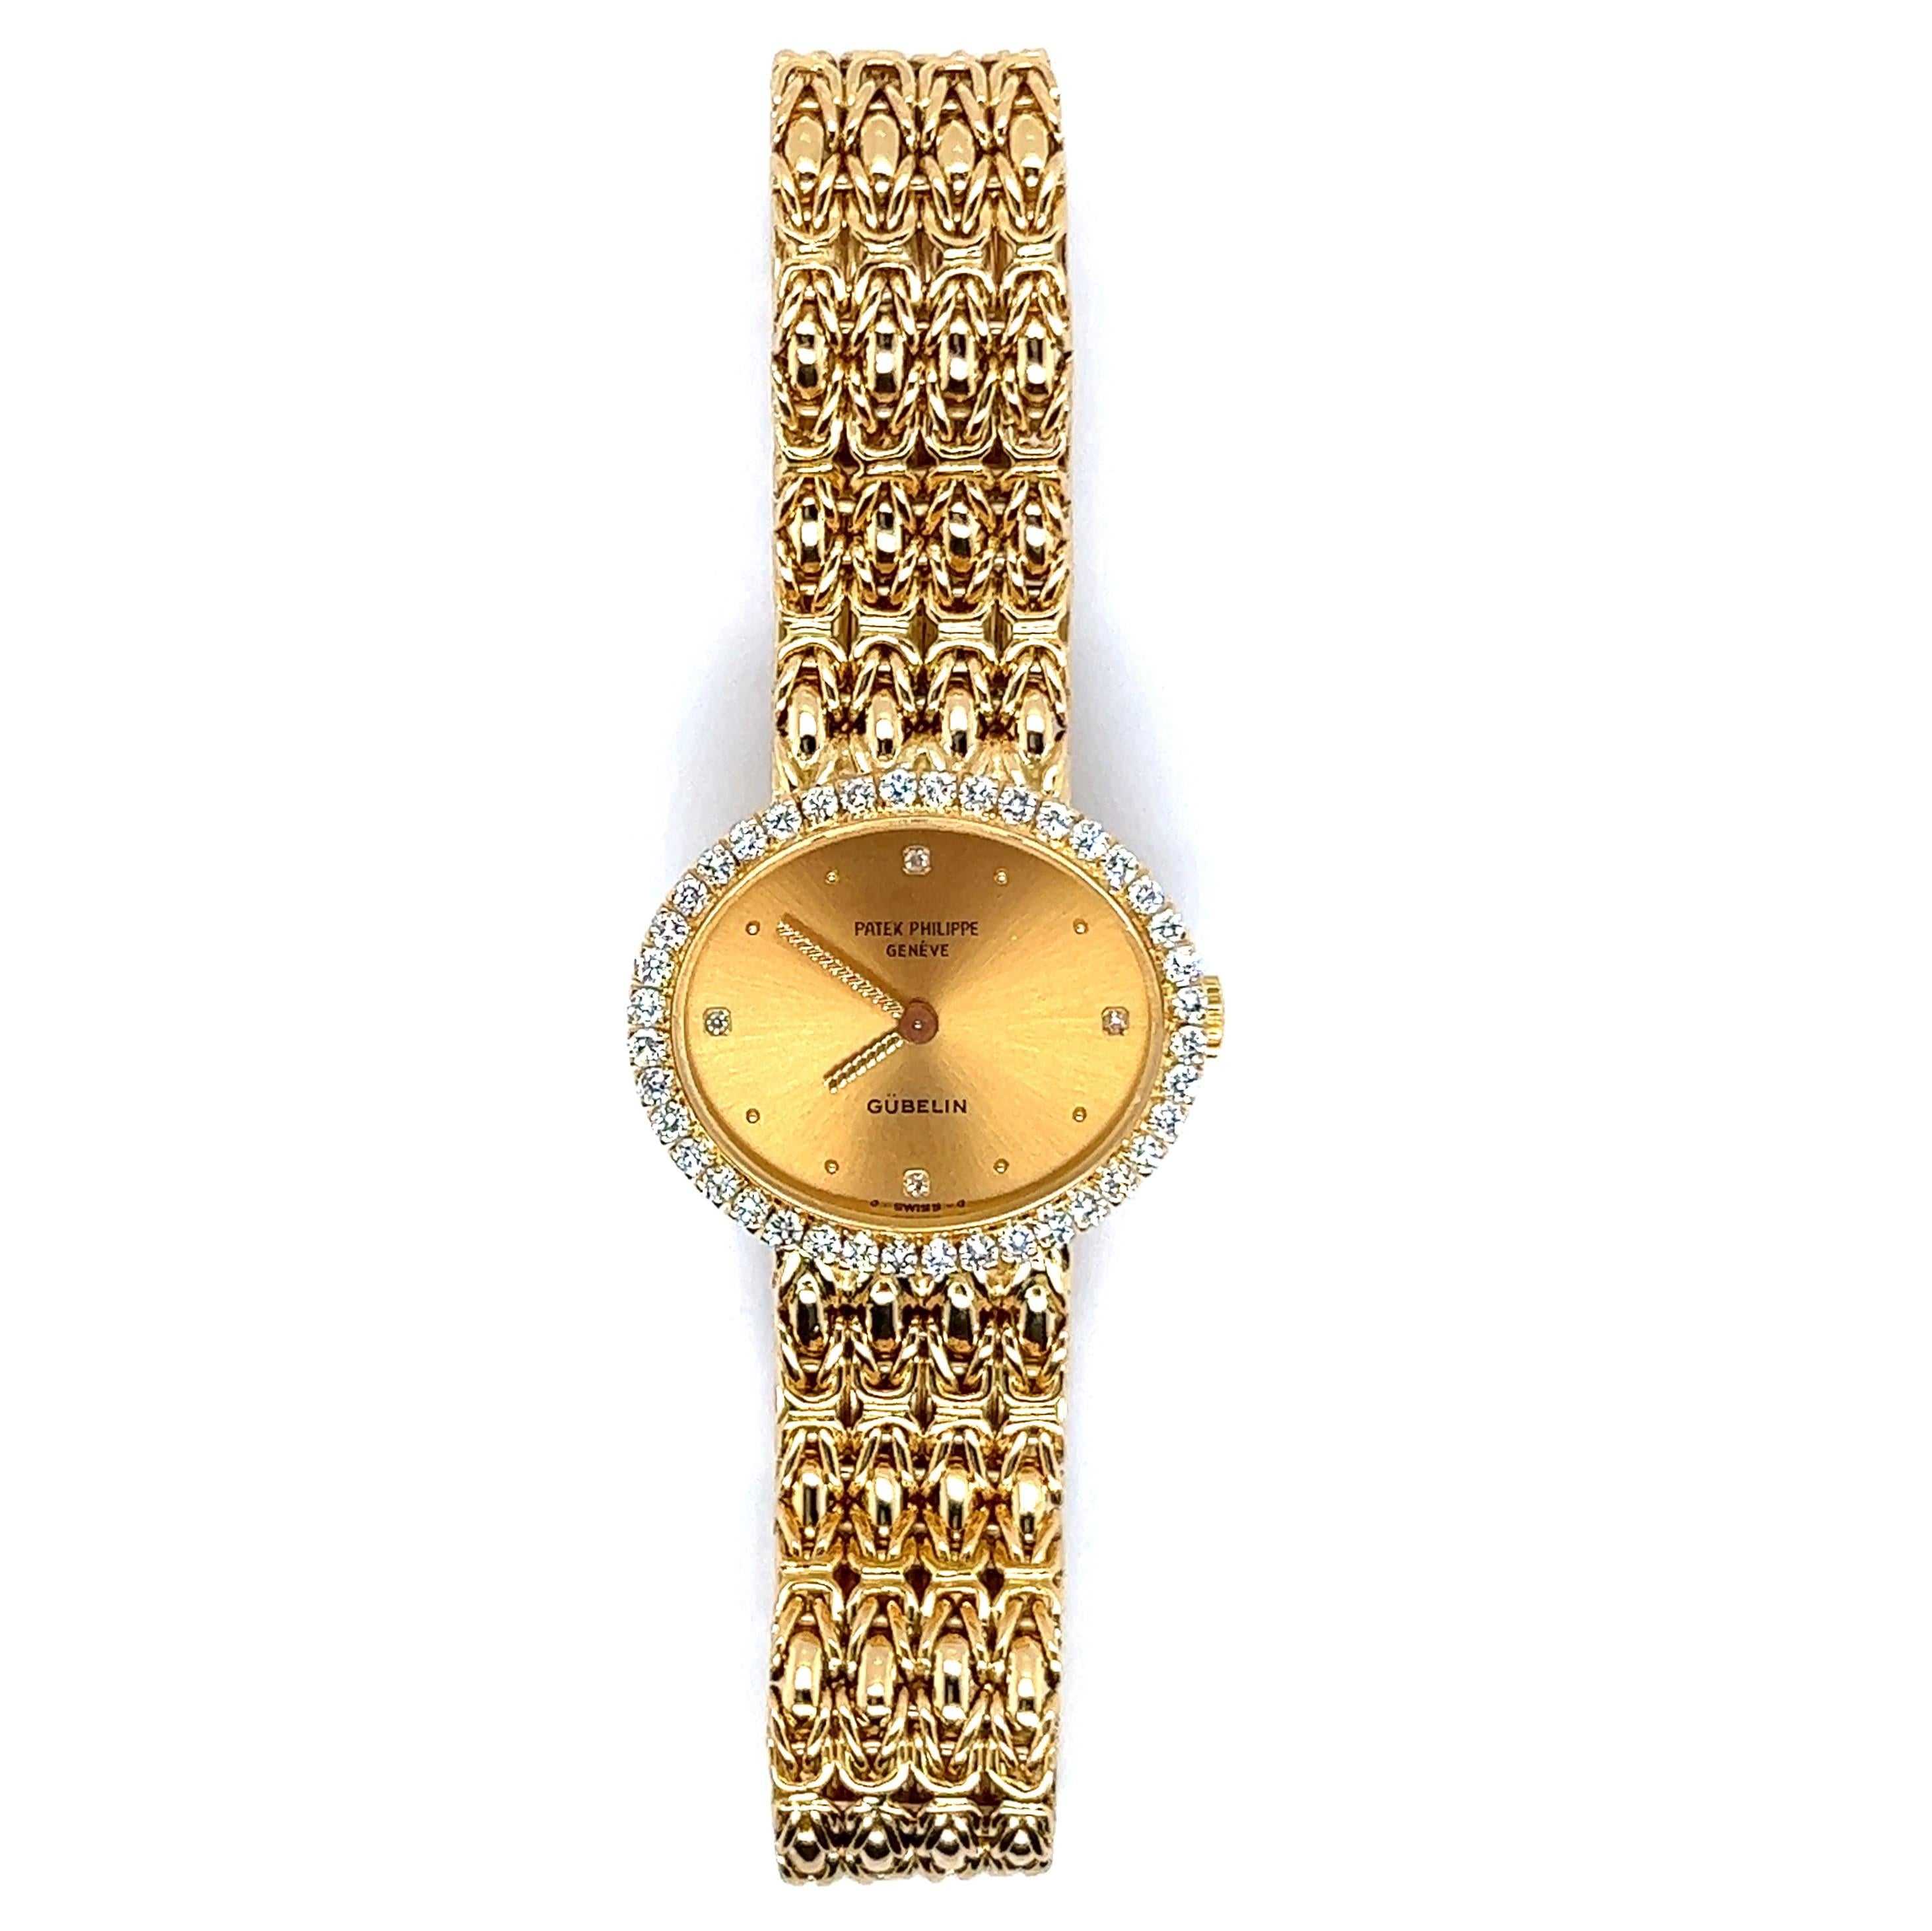 Exclusive Patek Philippe Ladies Cocktail Watch in gold is a true symbol of sophistication. Dating back to 1839, Patek Philippe has been synonymous with excellence and quality. Collaborating with Gübelin, renowned for their expertise in gemstones and